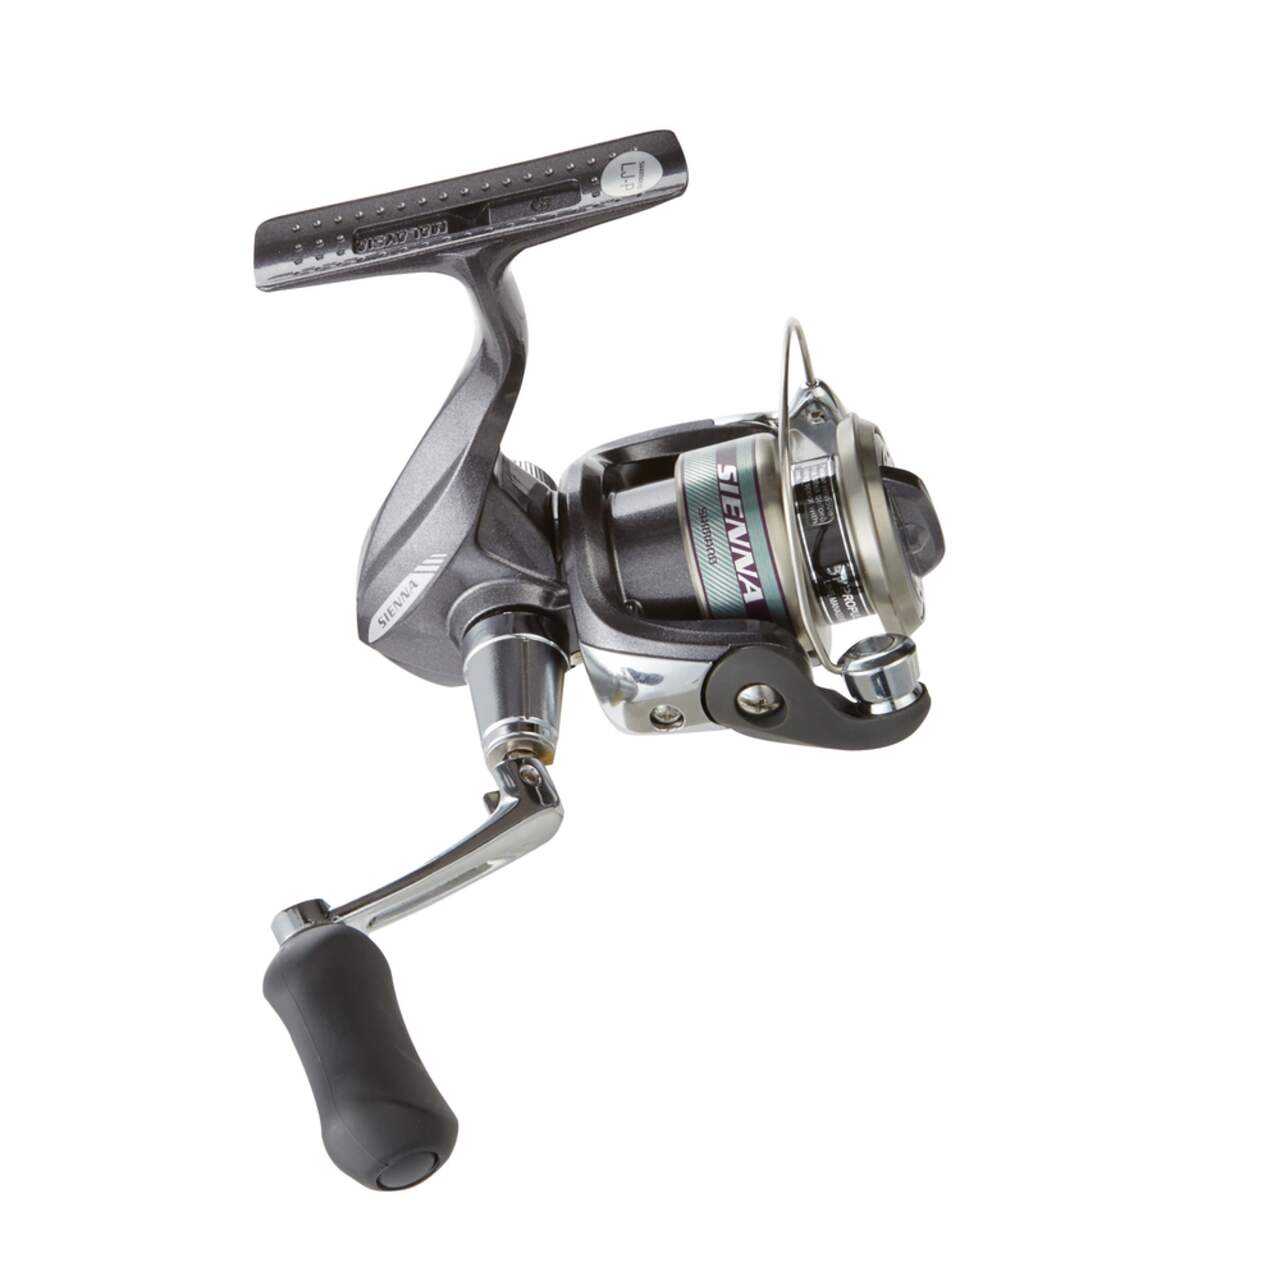 https://media-www.canadiantire.ca/product/playing/fishing/ice-fishing/0775277/shimano-sienna-sn500fd-spinning-reel-f840b4e6-478e-43a7-86ef-378004023a7a.png?imdensity=1&imwidth=640&impolicy=mZoom